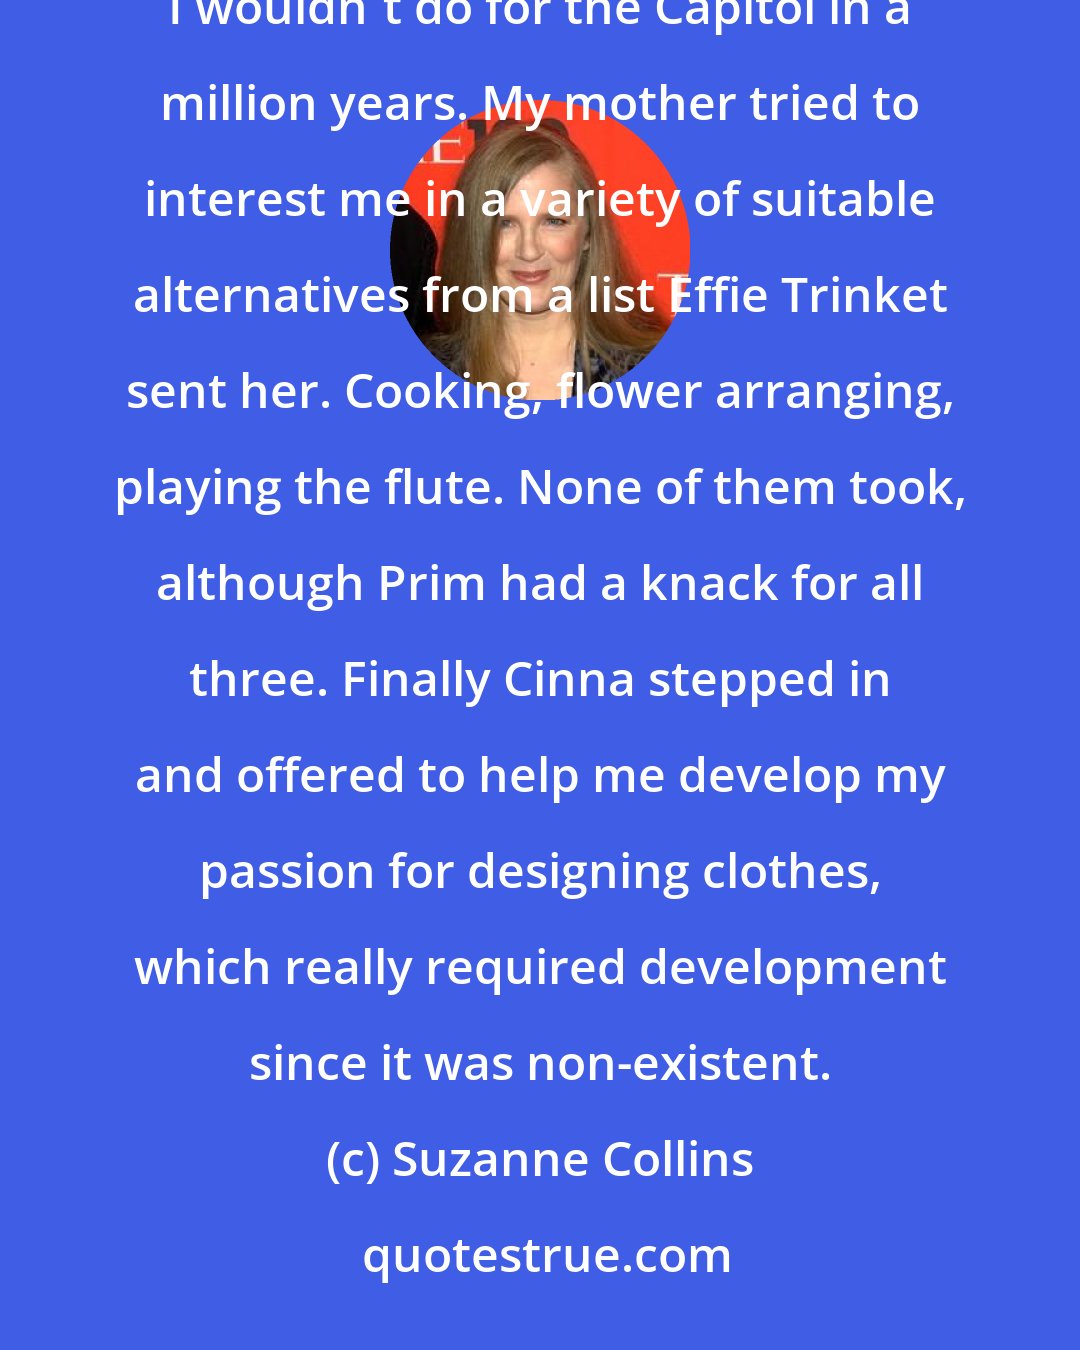 Suzanne Collins: I don't have a talent, unless you count hunting illegally, which they don't. Or maybe singing, which I wouldn't do for the Capitol in a million years. My mother tried to interest me in a variety of suitable alternatives from a list Effie Trinket sent her. Cooking, flower arranging, playing the flute. None of them took, although Prim had a knack for all three. Finally Cinna stepped in and offered to help me develop my passion for designing clothes, which really required development since it was non-existent.